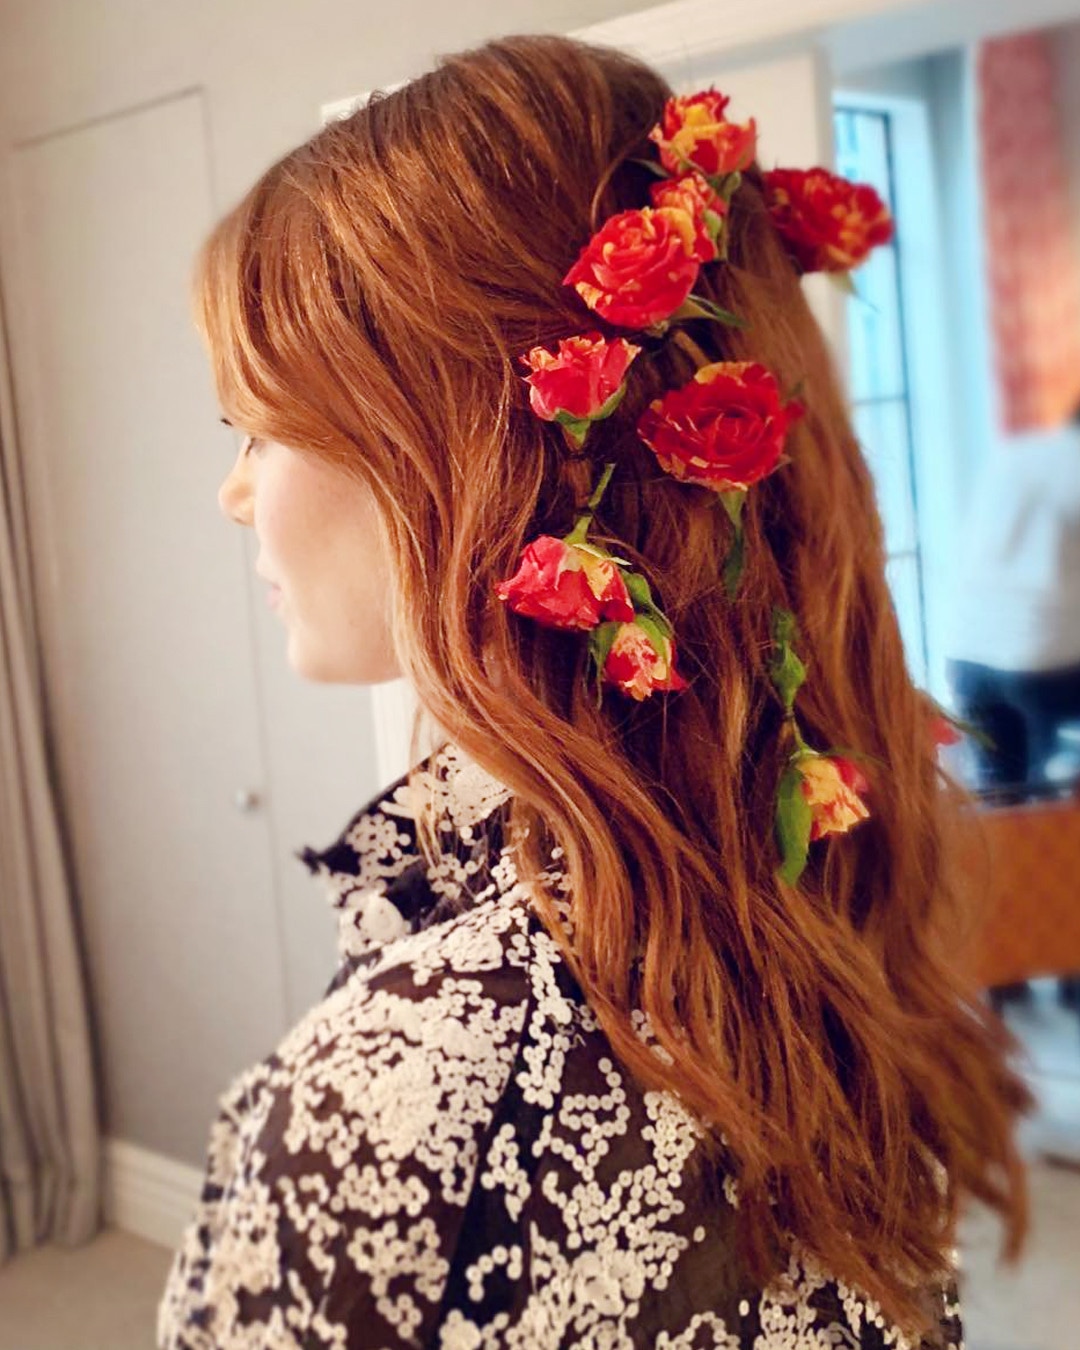 Emma Stone's Hairstylist Shares 4 Weather-Proof Styling Tips - E! Online